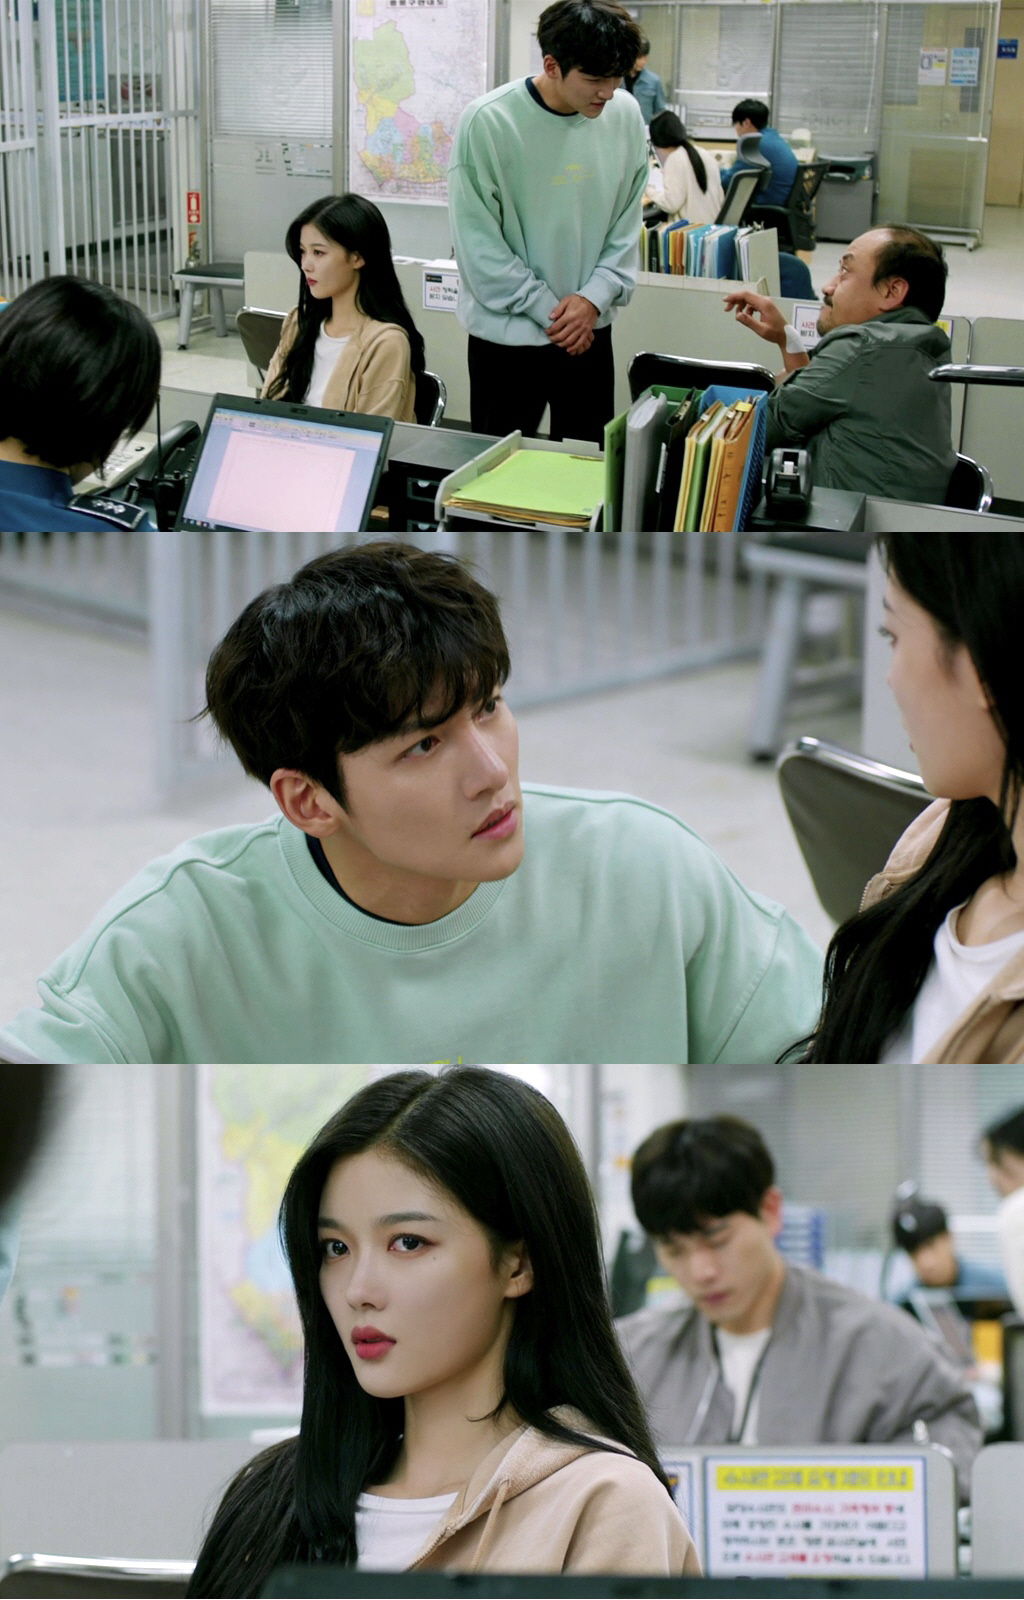 Why did Ji Chang-wook and Kim Yoo-jung come to Police?SBSs Lamar Jackson Convenience store star (playwright Son Geun-joo/director Lee Myung-woo/producer Taewon Entertainment) depicts the manager Choi Dae-heon (Ji Chang-wook) and Kim Yoo-jung, who are approaching through various incidents in the Convenience store. ...The star is struggling to become a formal alba even in the old days of Choi Dae-heon.However, in the last three episodes, Choi Dae-heon misunderstood the star.It was seen by Jeong Sae-Sun and GFriend Yoo Yeon-ju (Han Seon-hwa) having a scuffle.The star was the one who saved the flexible liquor that was being suffered by the Yangchi, but Choi Dae-heon, who did not know it, Misunderstood the star, and the scene where the three people face each other, amplified the curiosity for future development.In the meantime, the production team of Convenience store morning star released a serious atmosphere that Choi Dae-heon and Jeong Sae-sung have never seen before, ahead of the 4th broadcast today (27th).It was the two people who were together in Police.The star in the photo is being investigated in Police, and the image of the star with red eyes as if it were unfair causes the sadness.Next to him, Choi Dae-heon is figuring out what happened.Choi Dae-heon, who has always been like a bullshit, bursts into anger that he can hardly see in Police on this day.The star makes me wonder why I was under police investigation, what Choi Dae-heon would have been angry about.Choi Dae-heon had previously suspected the past of the star, and tried to cut it off as a temporary alba.The case with GFriend Yoo Yeon-ju was added to this, and eventually he decided to cut the star. Then he heard that the star was being investigated at Police.Choi Dae-heon is really paying attention to whether it will be a dismissal of the star, how the meeting in Police will affect these relationships, and the attention of enthusiastic viewers is focused.Meanwhile, the fourth episode of SBSs Convenience Store Morning Star will be broadcast at 10 p.m. today (27th).